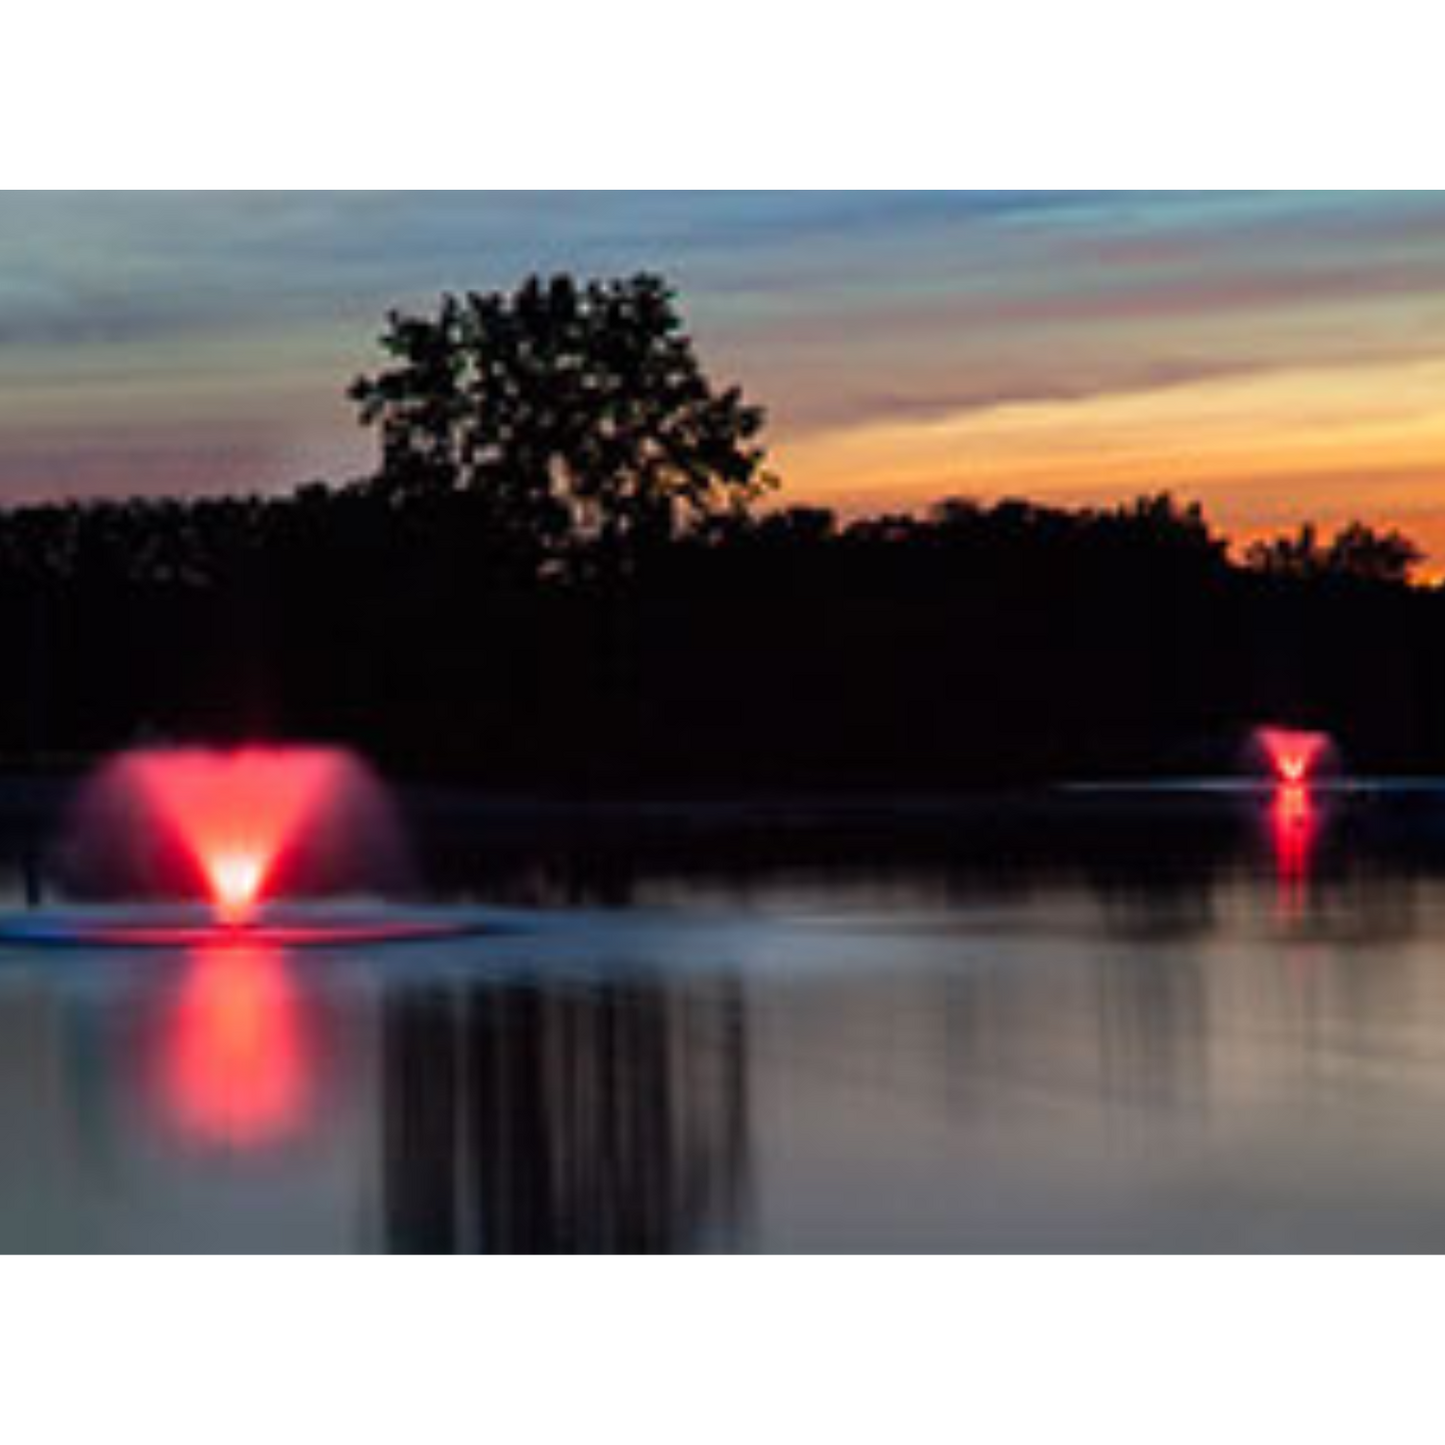 Scott Aerator Color-Changing LED RGB Fountain Lights